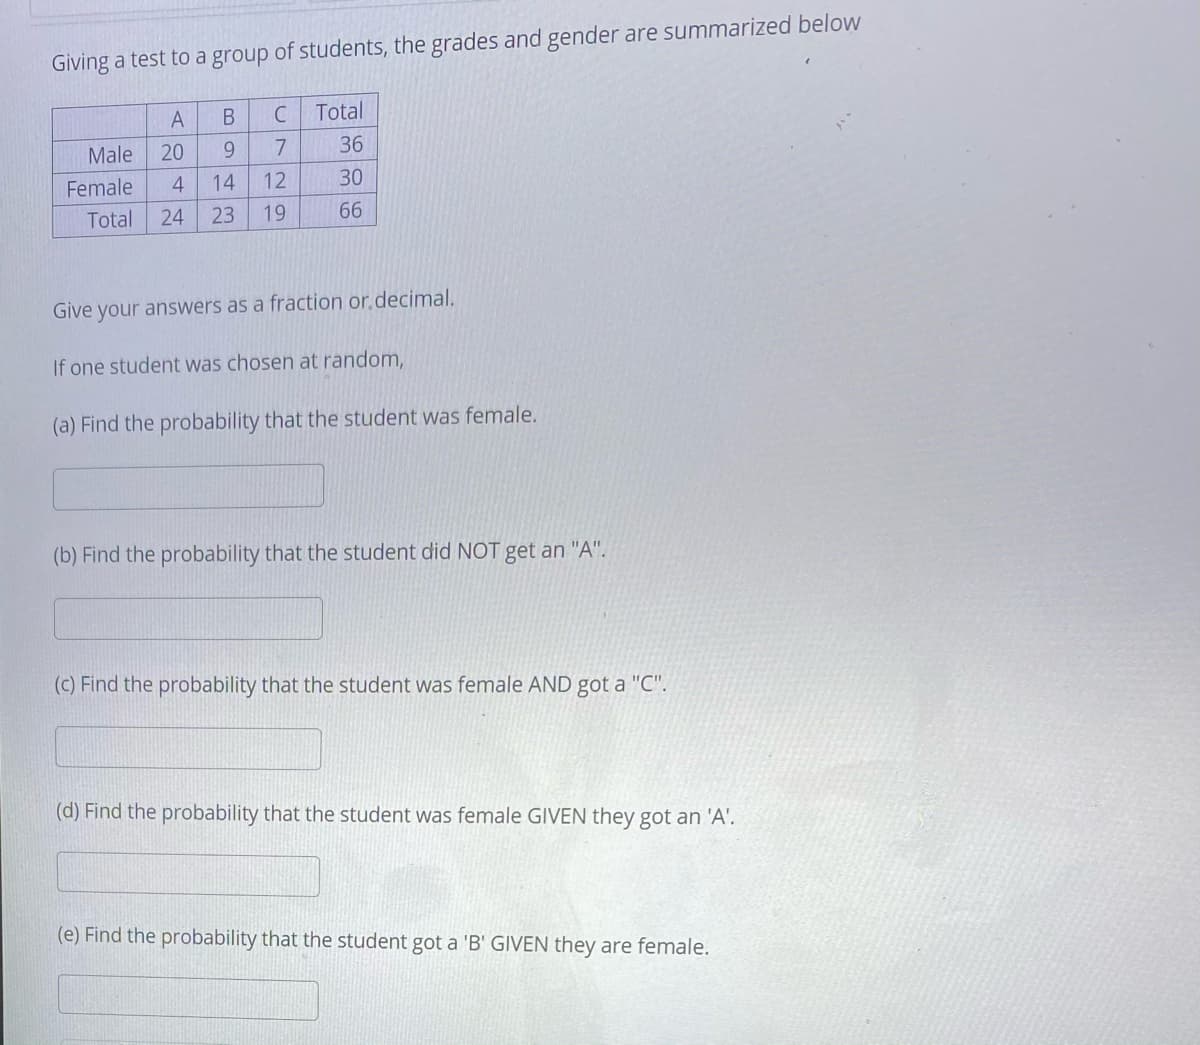 Giving a test to a group of students, the grades and gender are summarized below
C
Total
Male
20
9.
36
Female
4
14
12
30
Total
24
23
19
66
Give your answers as a fraction or.decimal.
If one student was chosen at random,
(a) Find the probability that the student was female.
(b) Find the probability that the student did NOT get an "A".
(c) Find the probability that the student was female AND got a "C".
(d) Find the probability that the student was female GIVEN they got an 'A'.
(e) Find the probability that the student got a 'B' GIVEN they are female.
